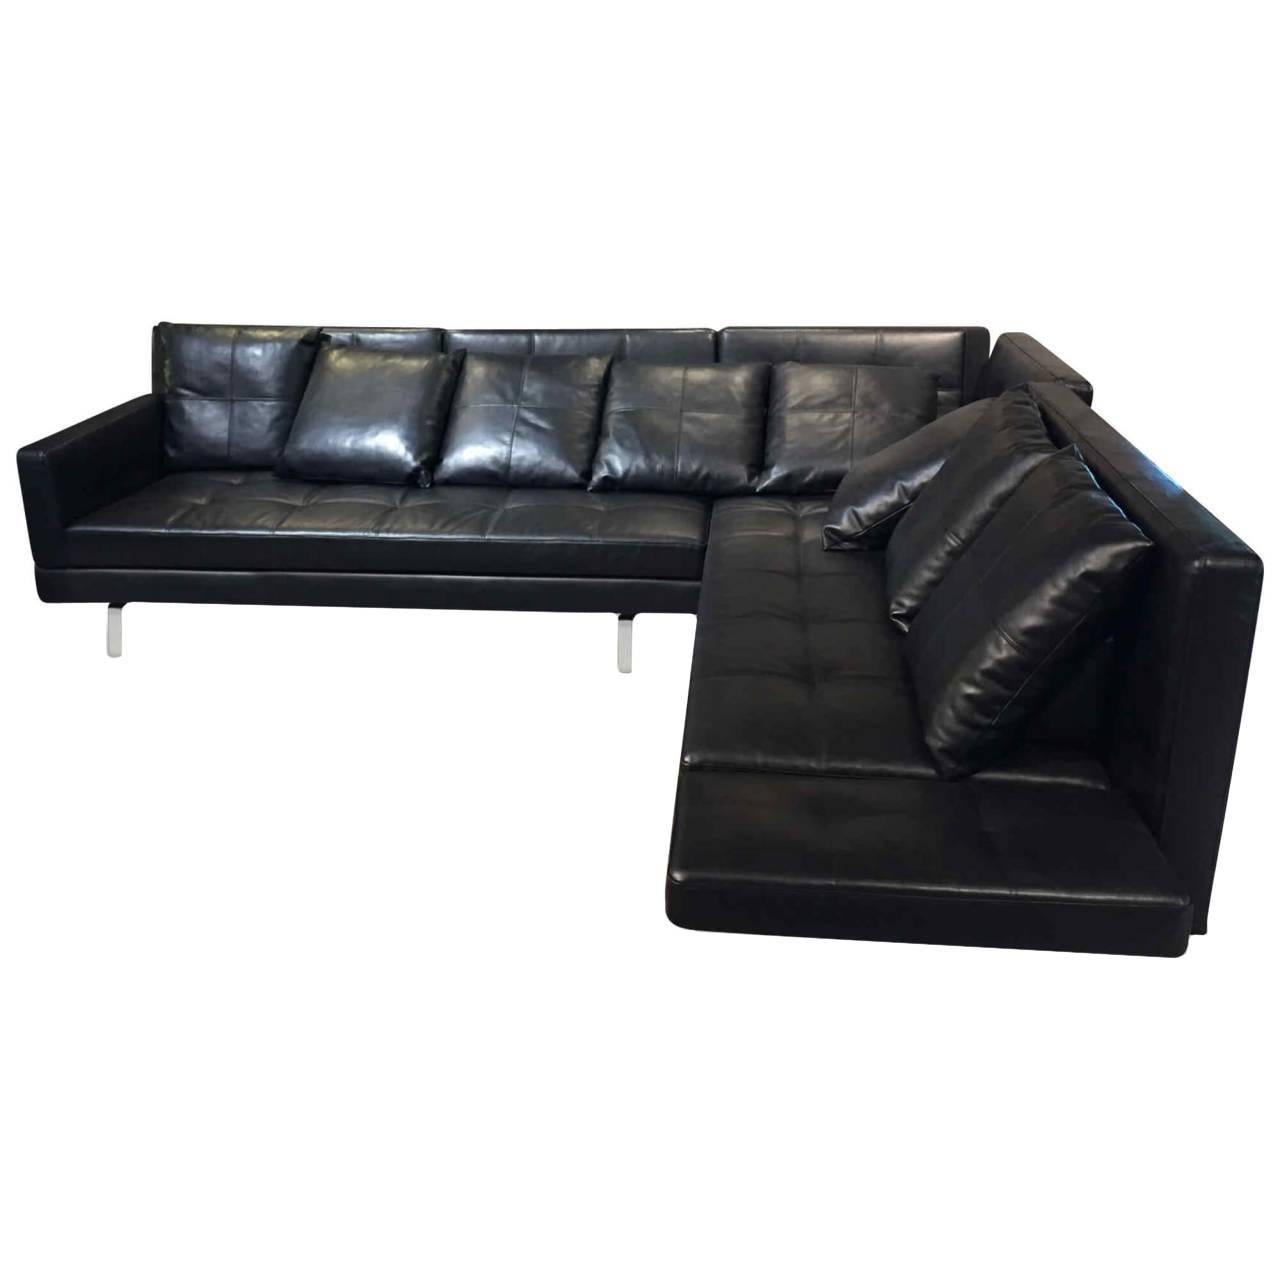 Sofa "Amber" by Manufacturer Brühl in 100% Genuine Leather and Chrome For Sale